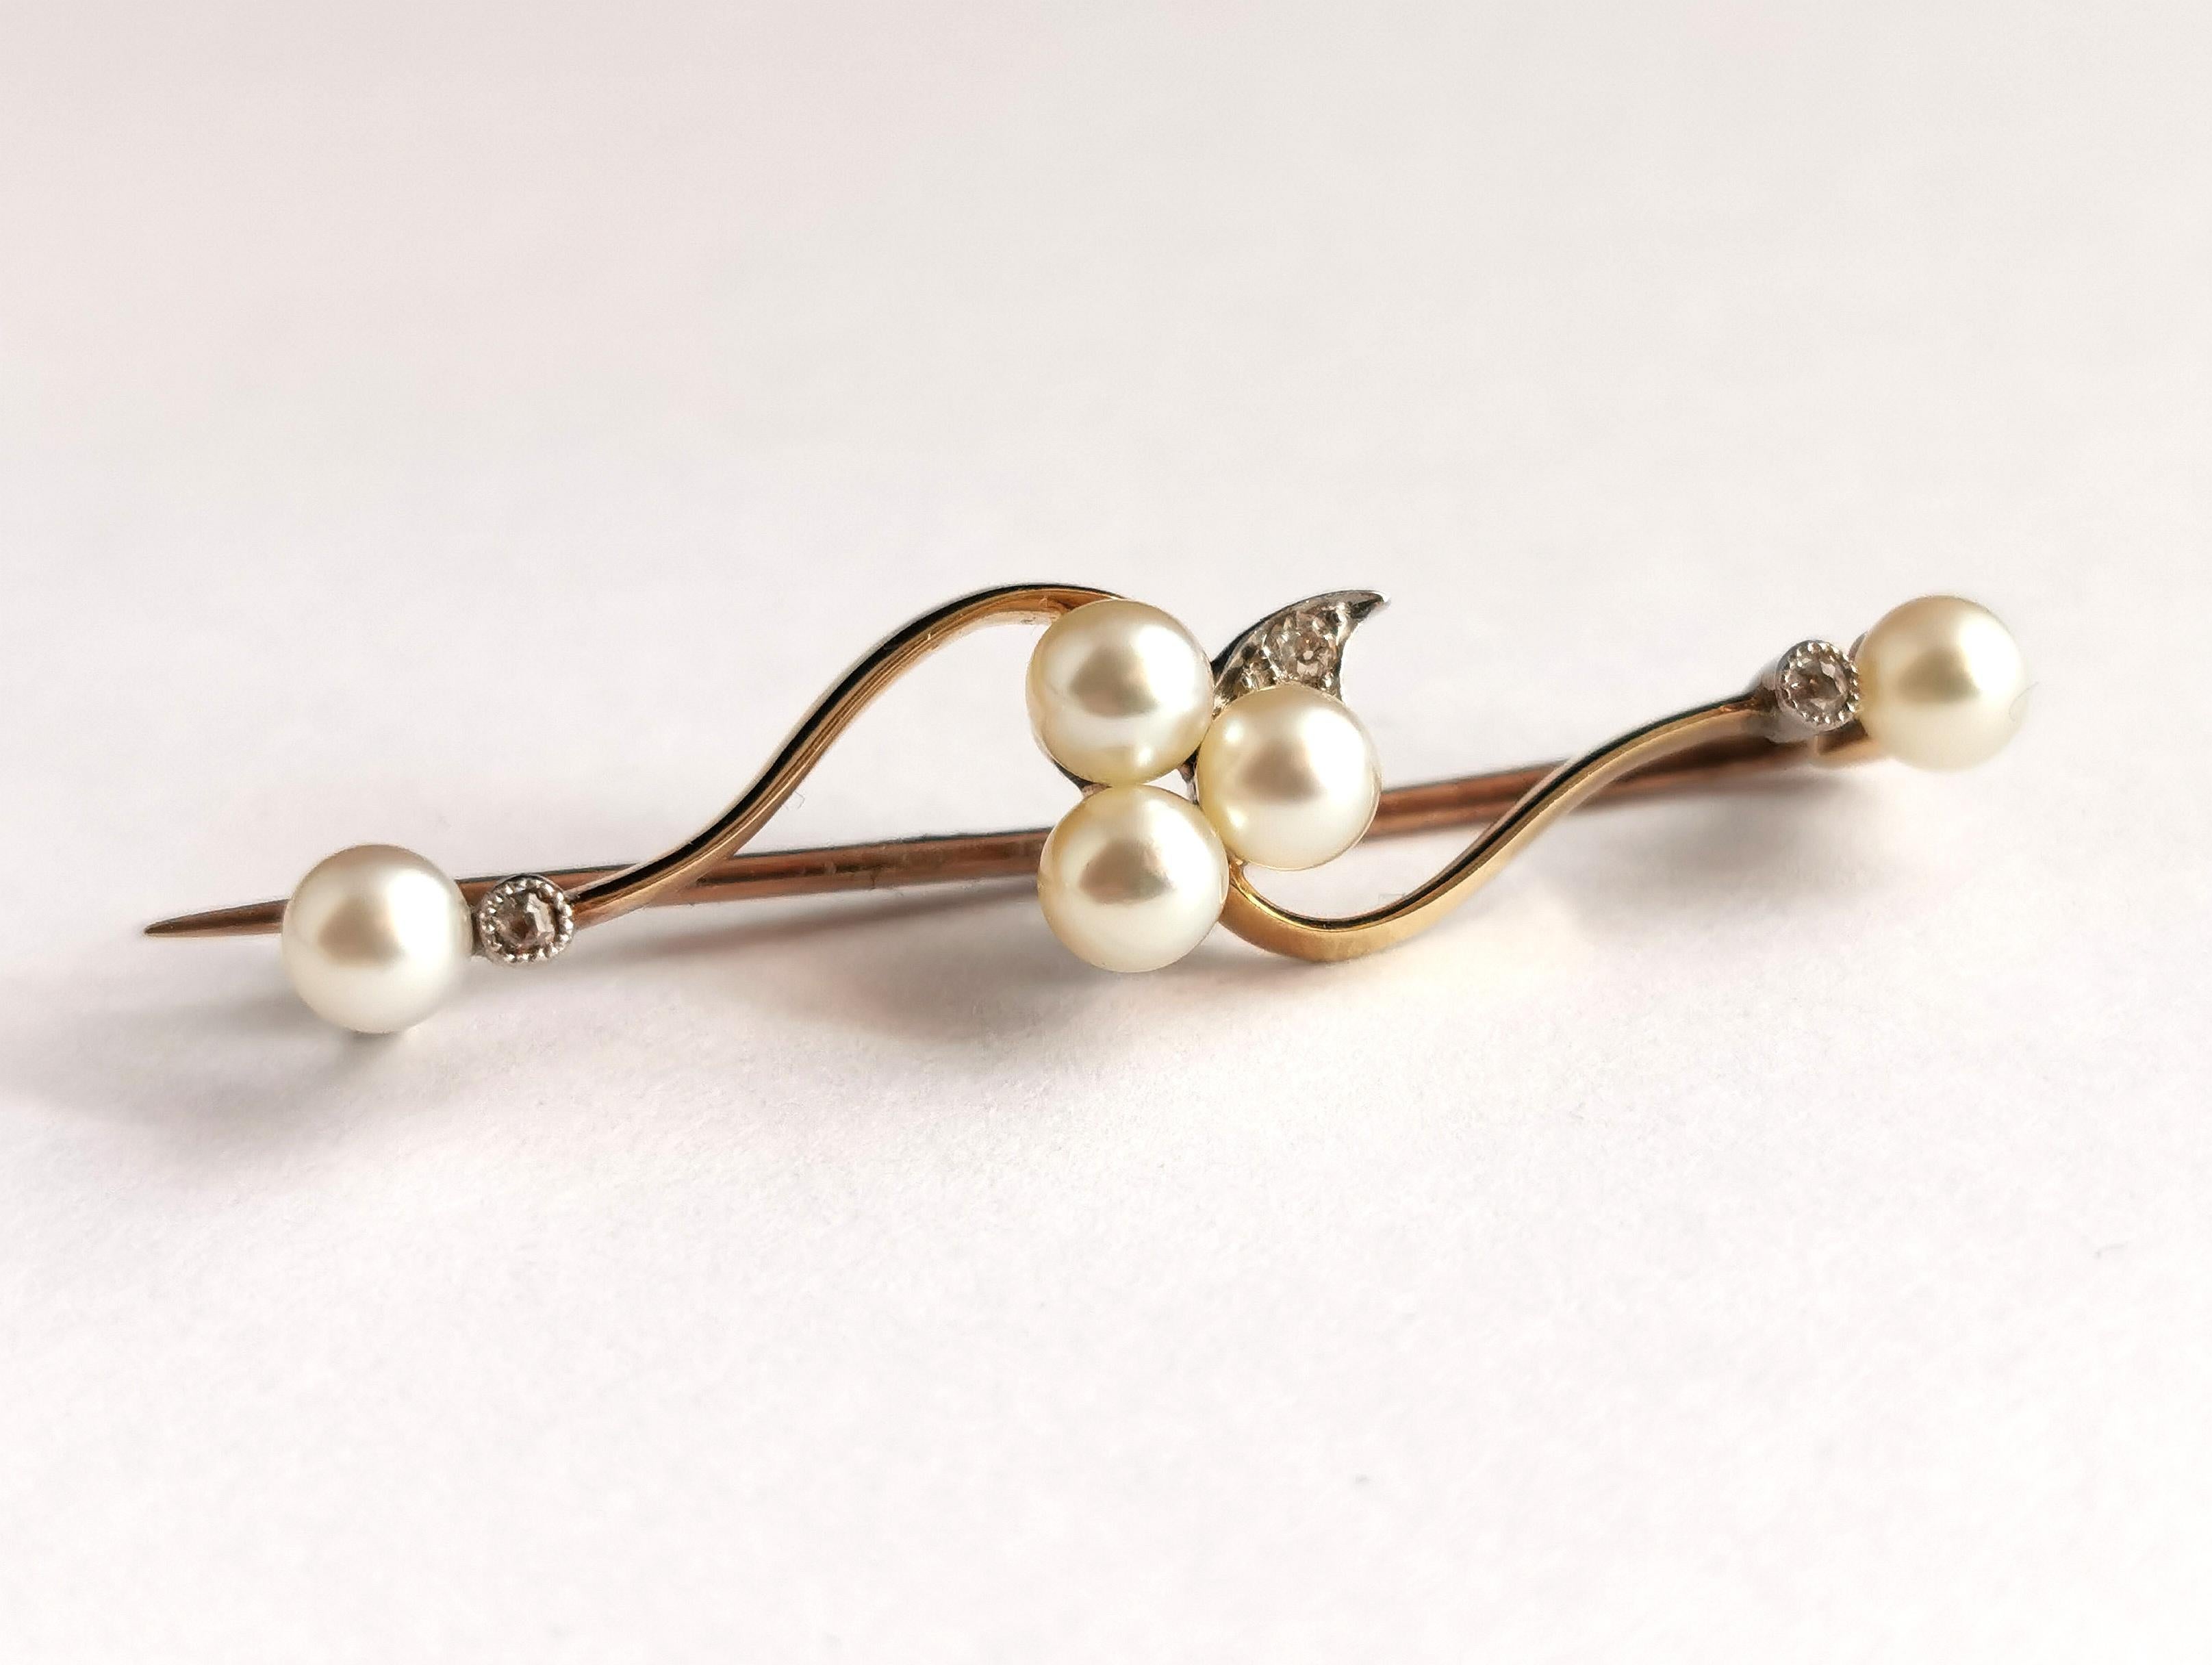 Antique Diamond and Pearl Shamrock Brooch, 9k Gold and Silver 8